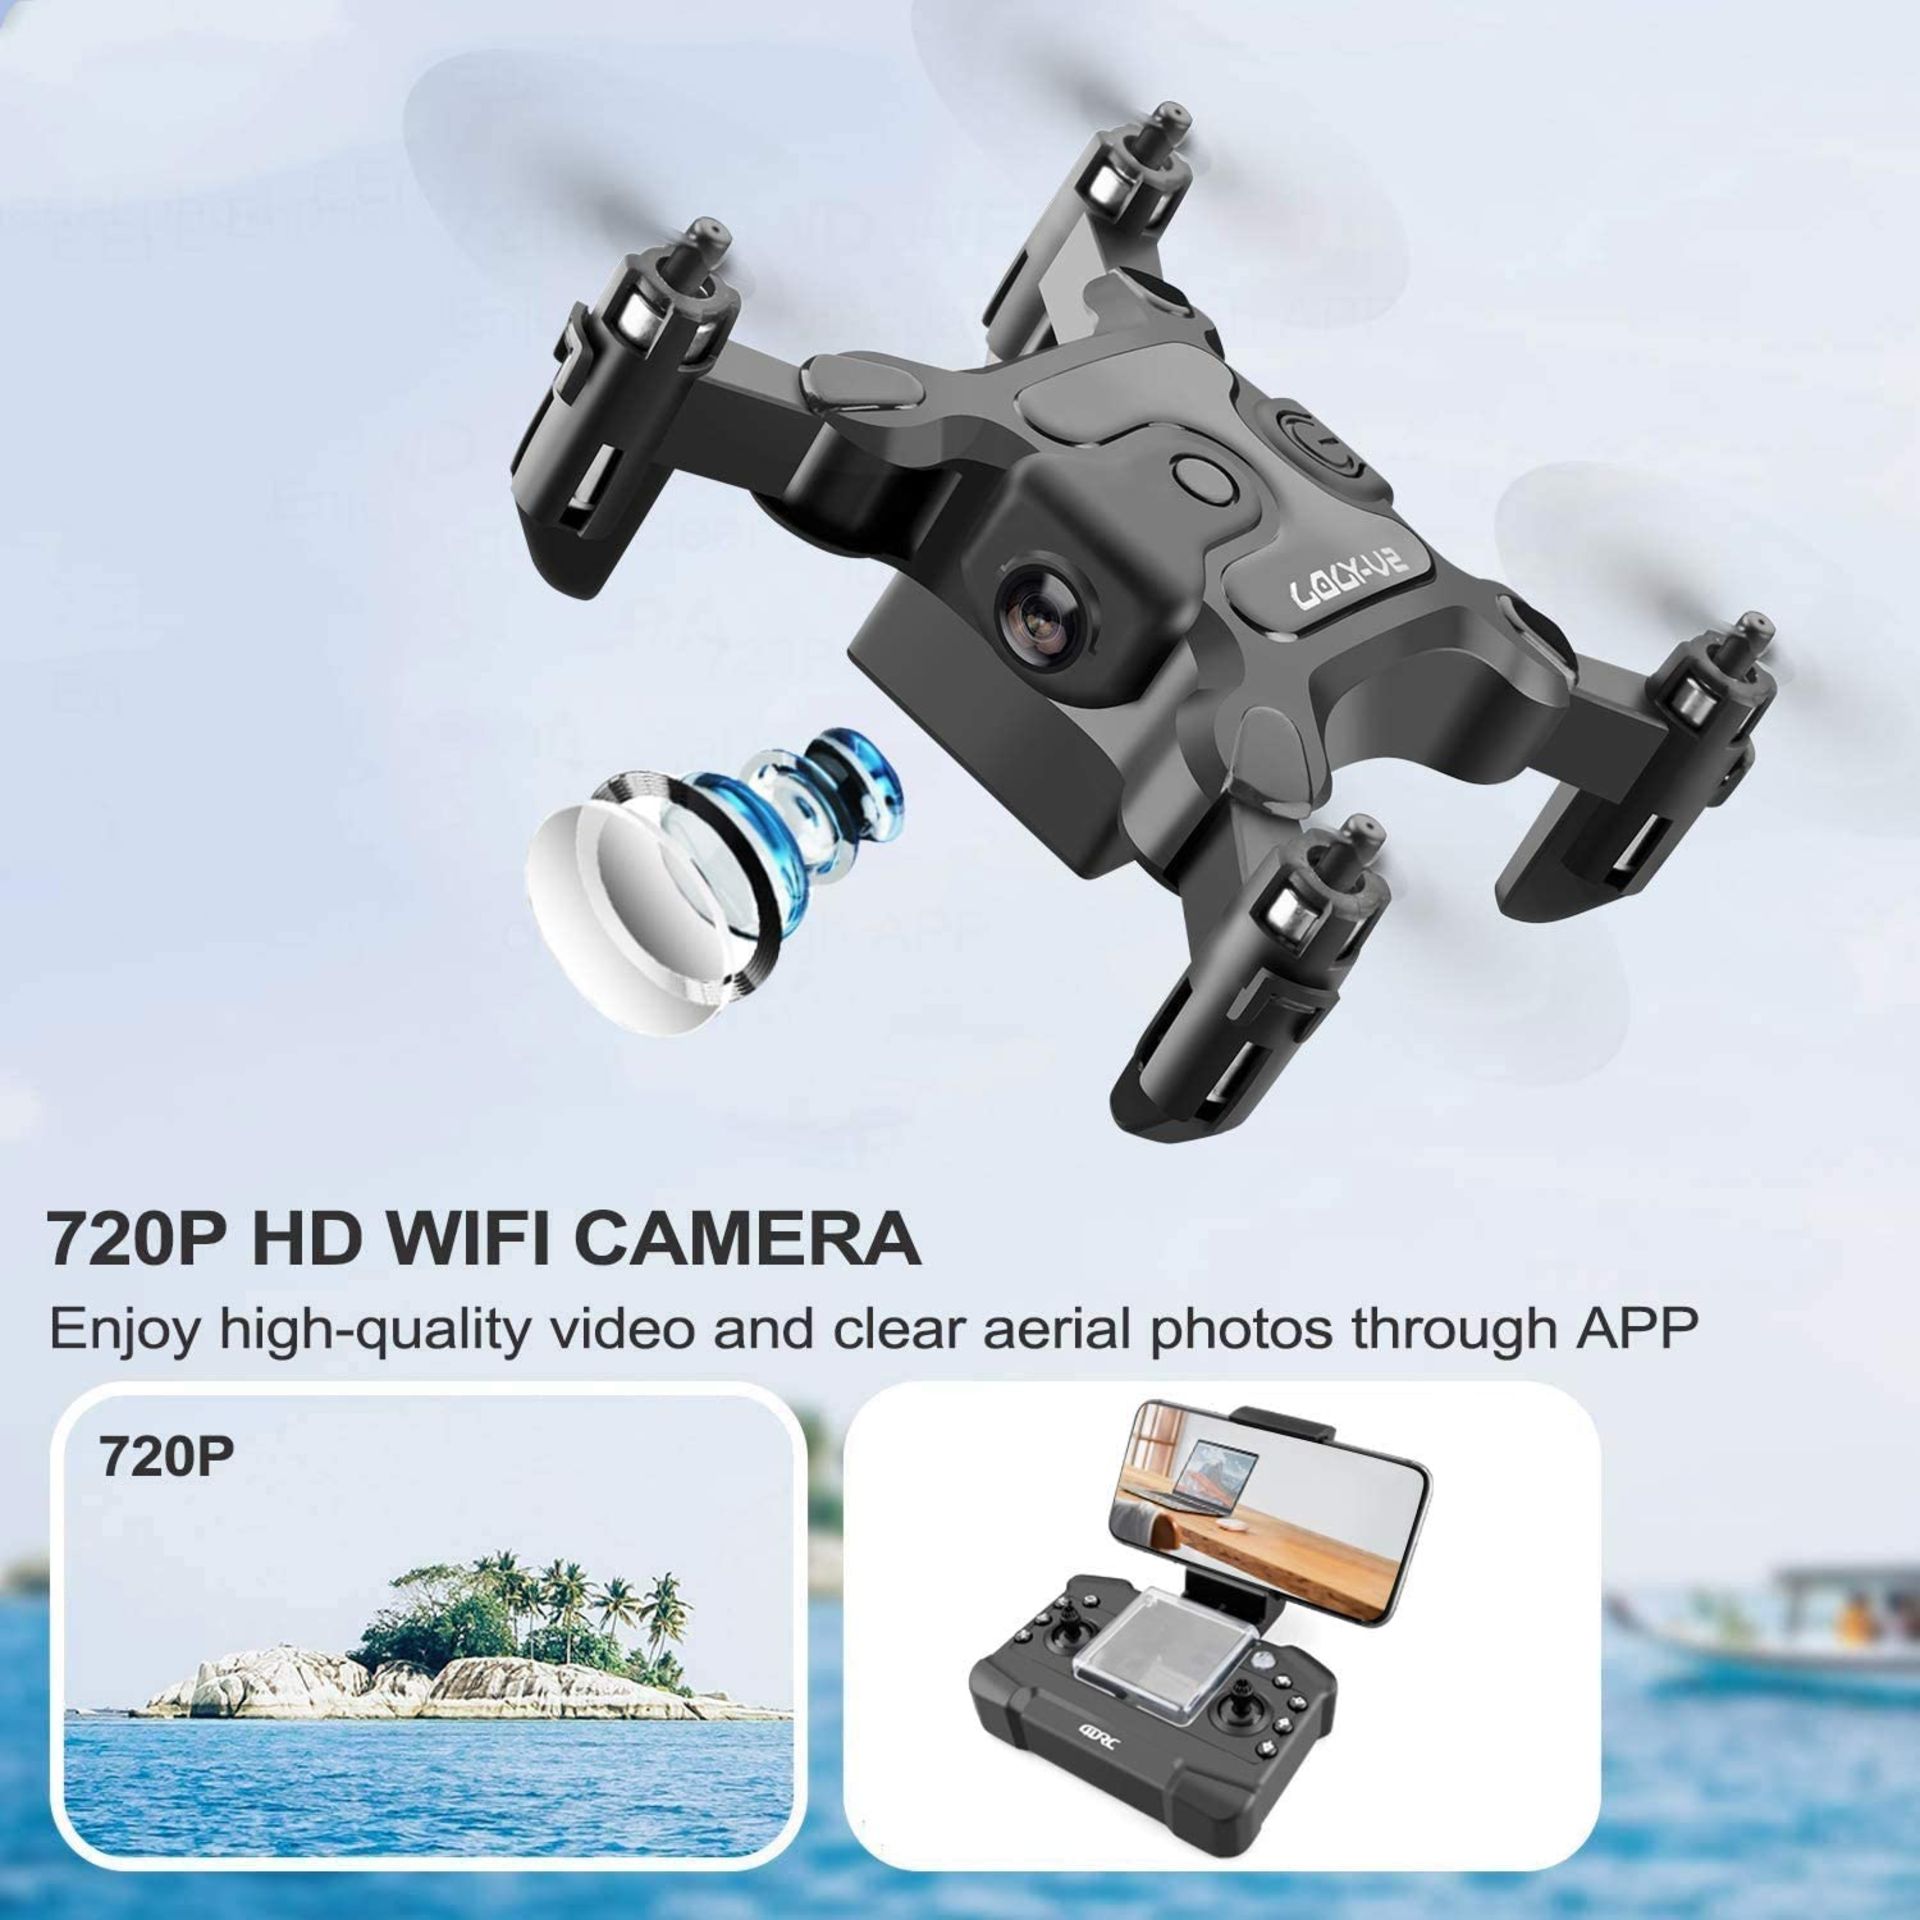 5 x 4DRC LOLY Mini Drone with 720p Camera for Kids and Adults, FPV Drone Beginners RC Foldable - Image 2 of 3